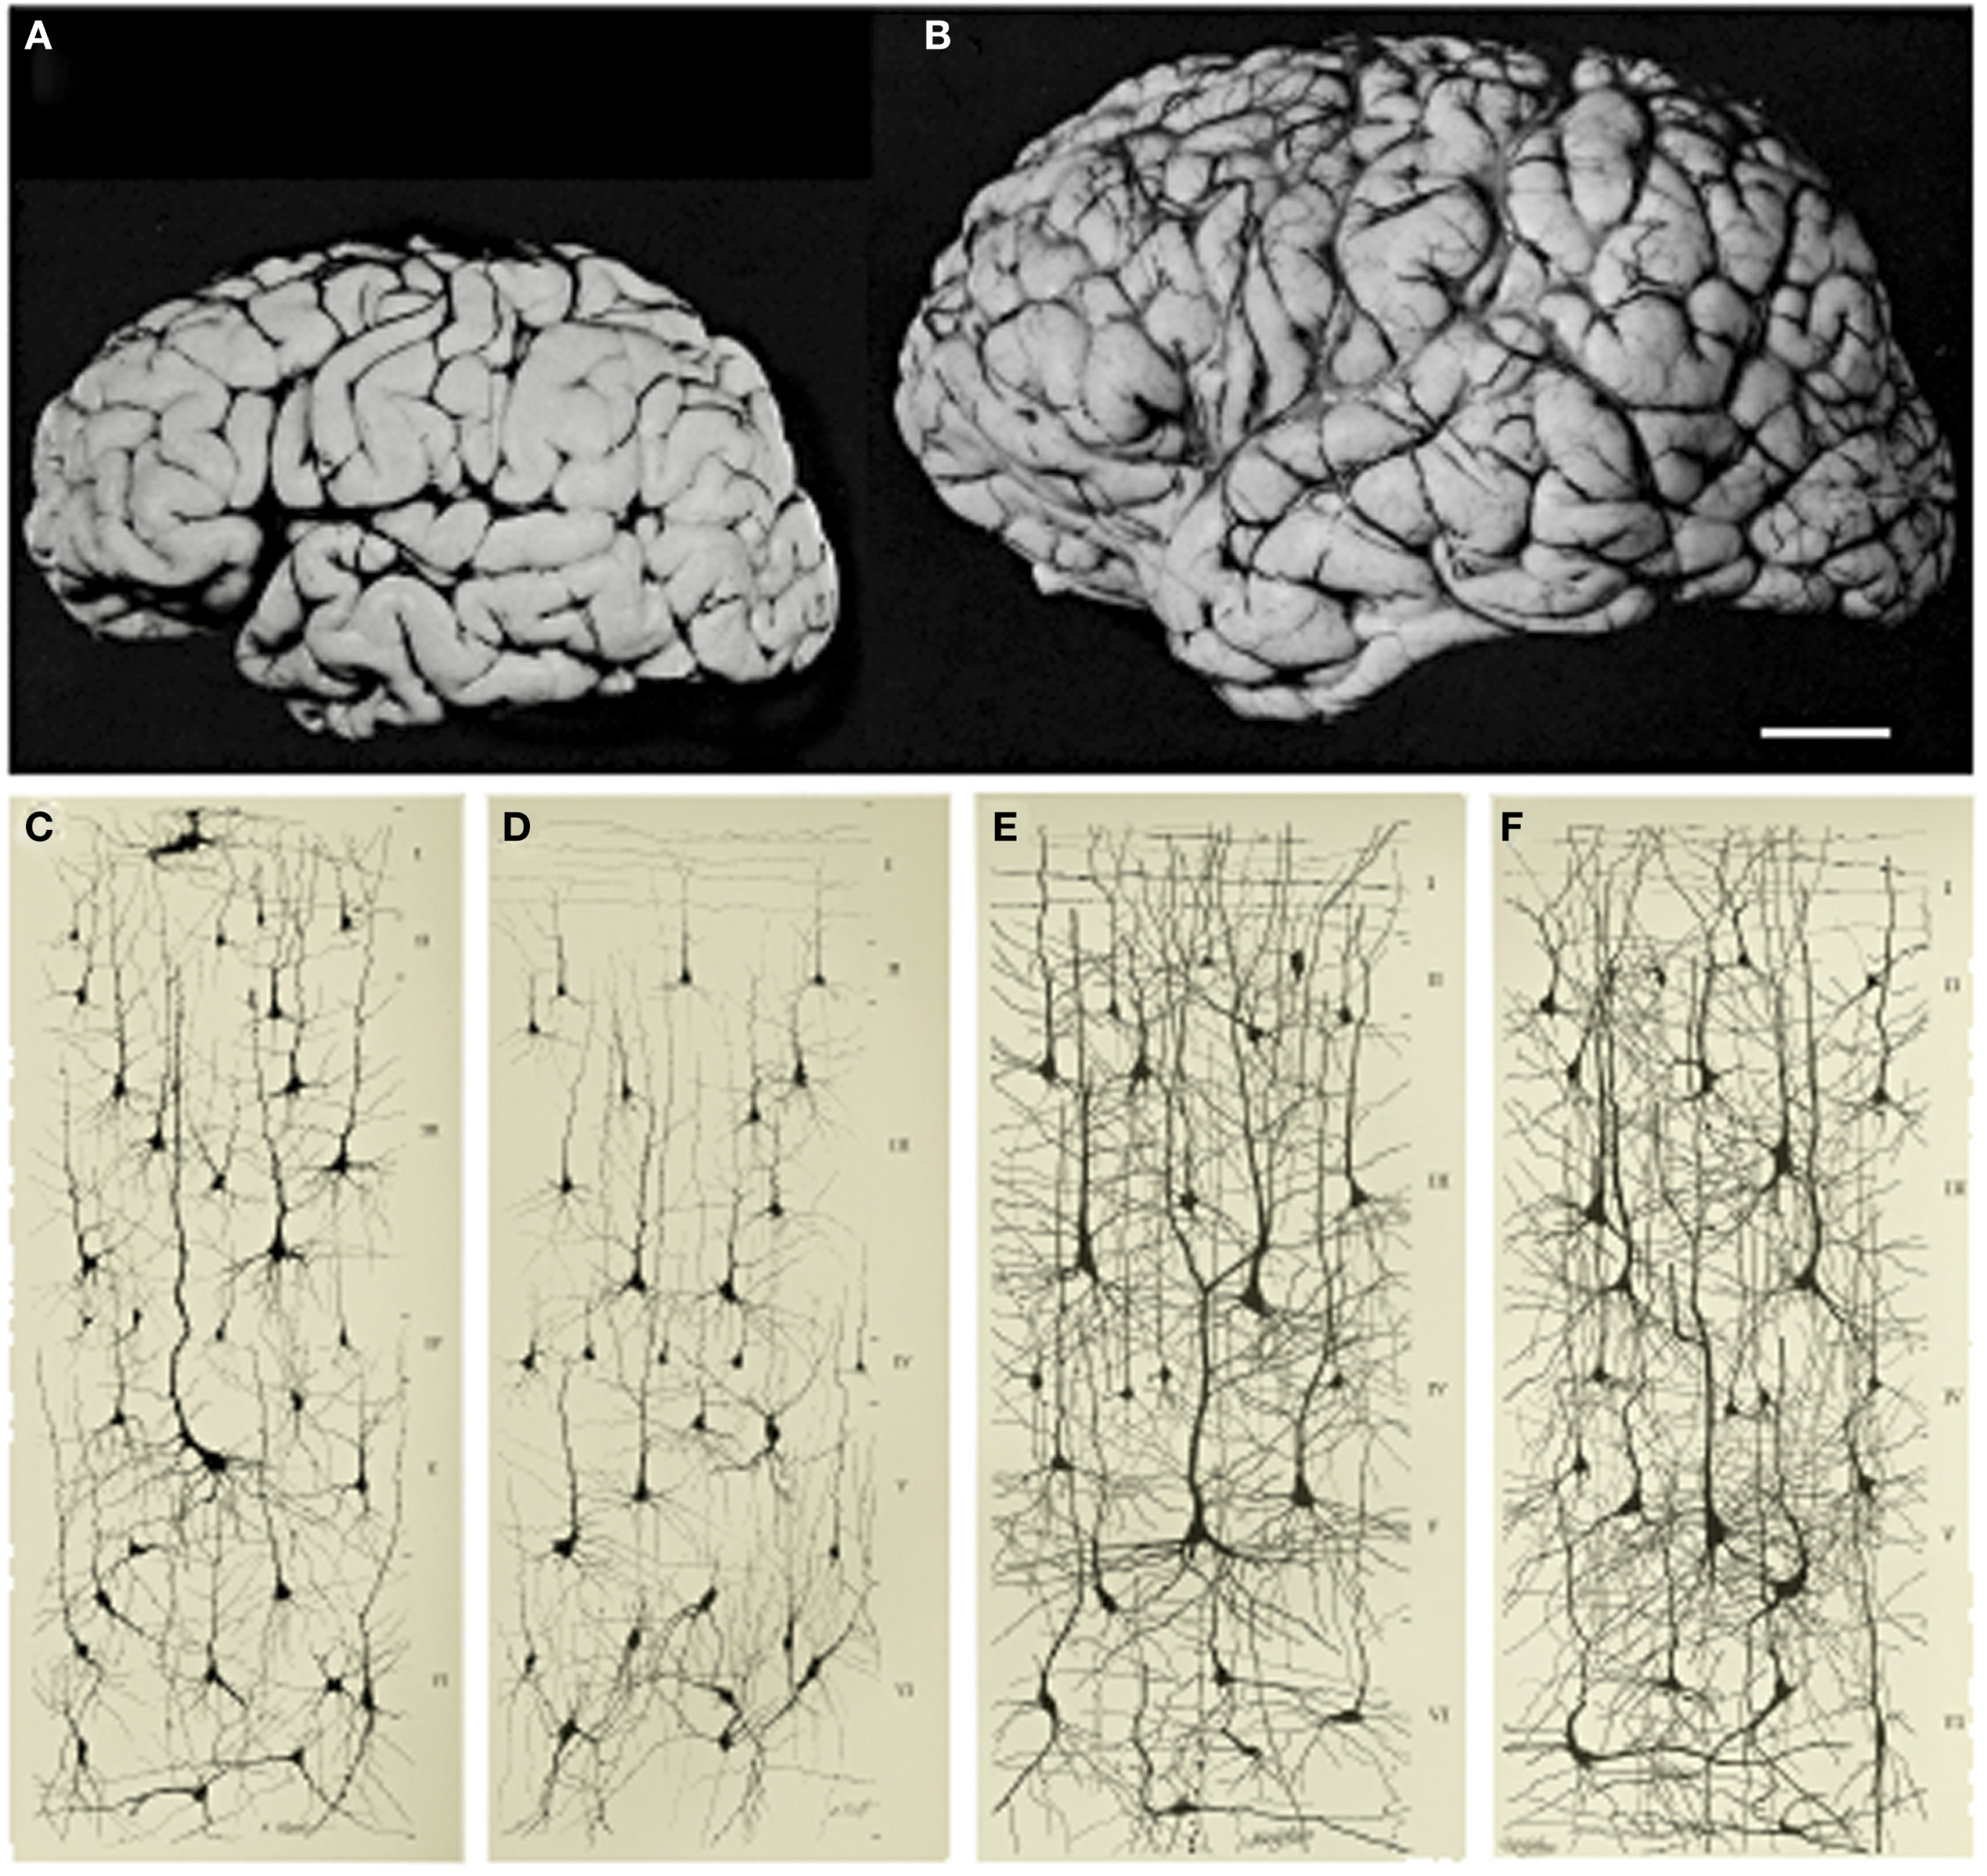 Photographs of the brains from a one-month and a six-year-old child, with drawings of neurons, as described in the caption 